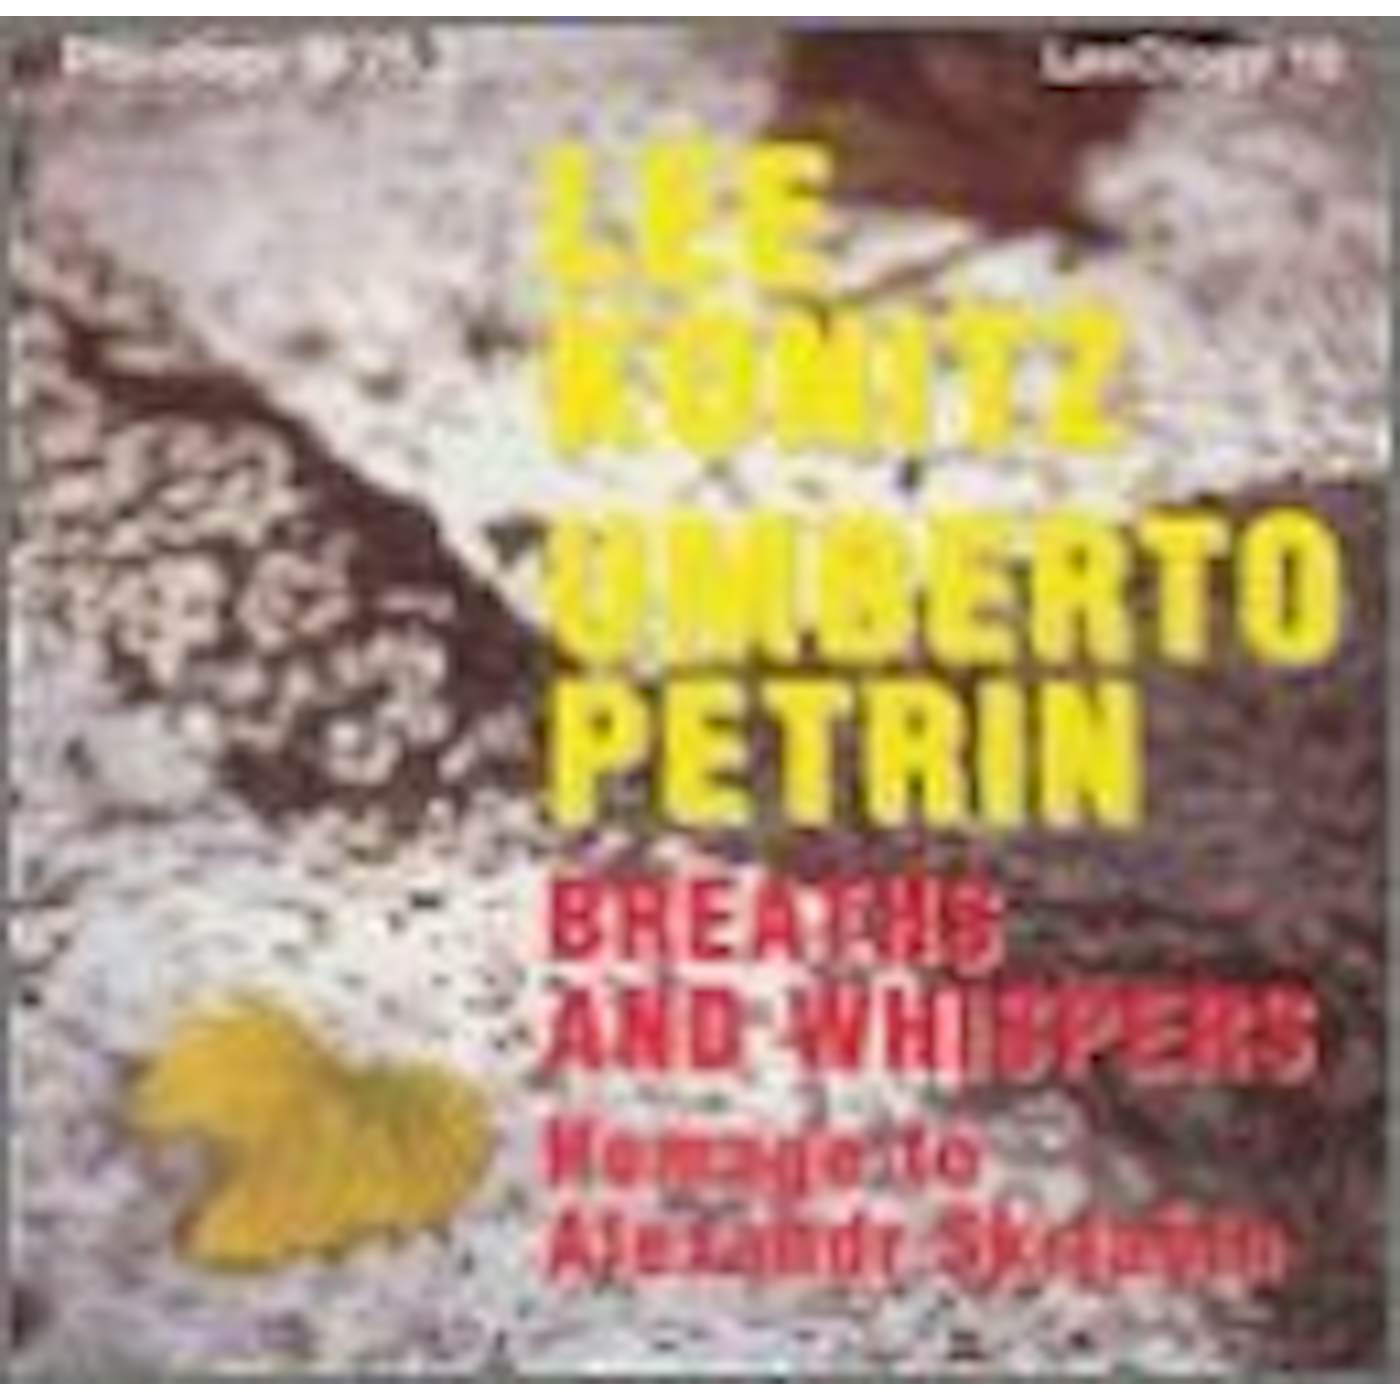 Lee Konitz BREATHS AND WHISPERS CD